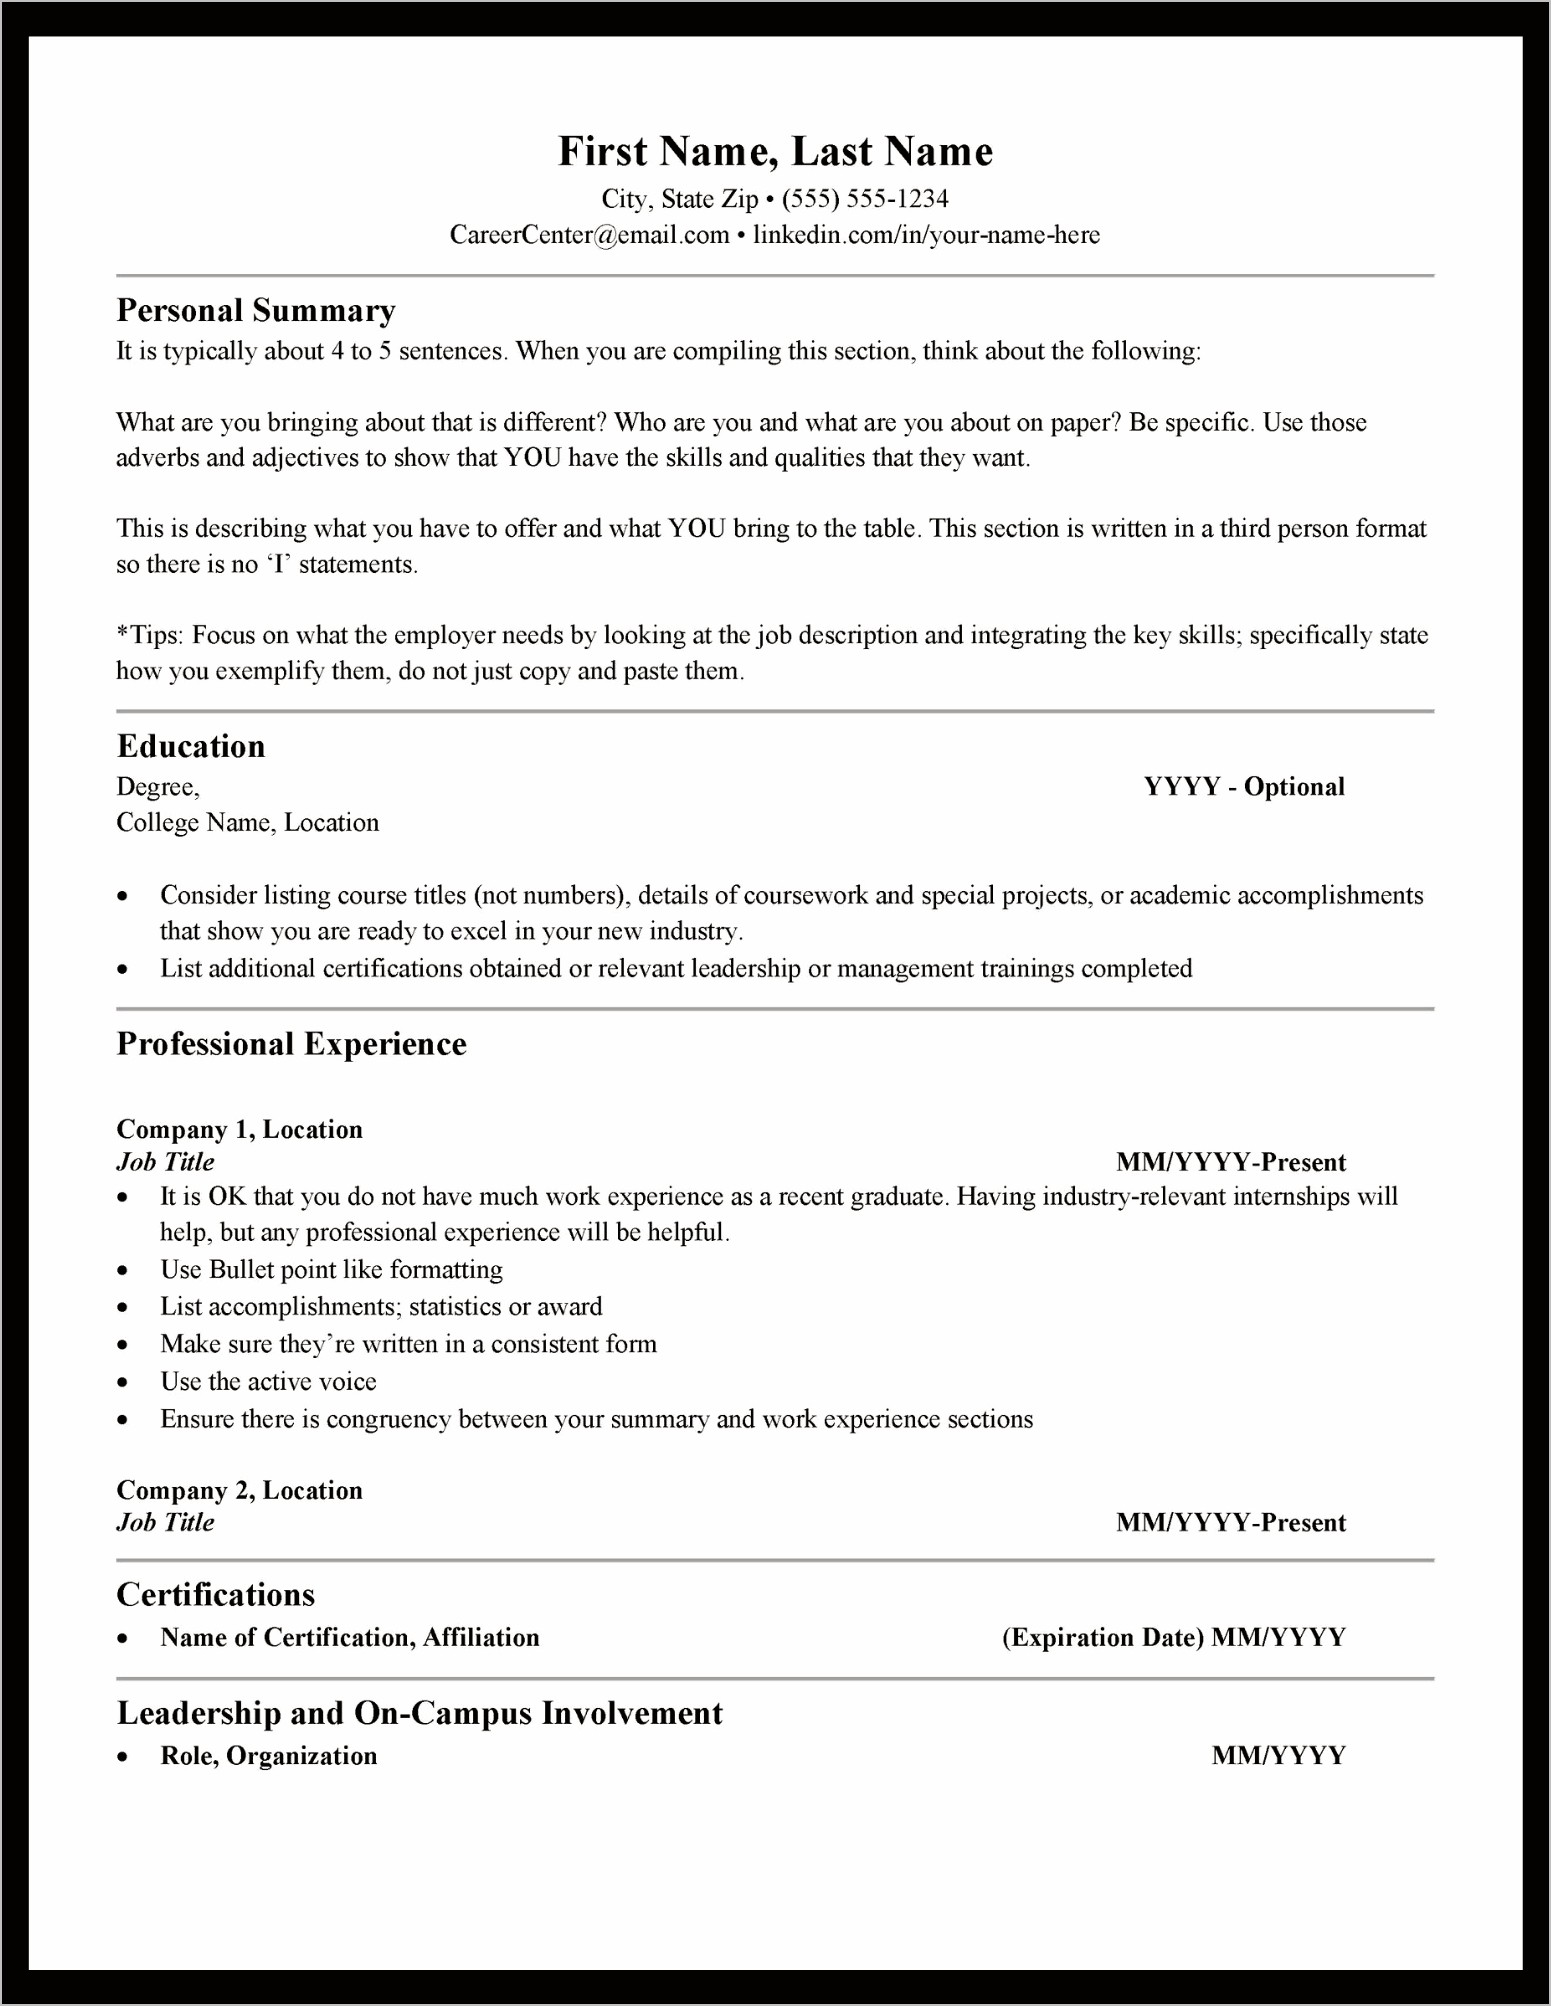 Sample Resume For Masters Level Counseling Practicum Students